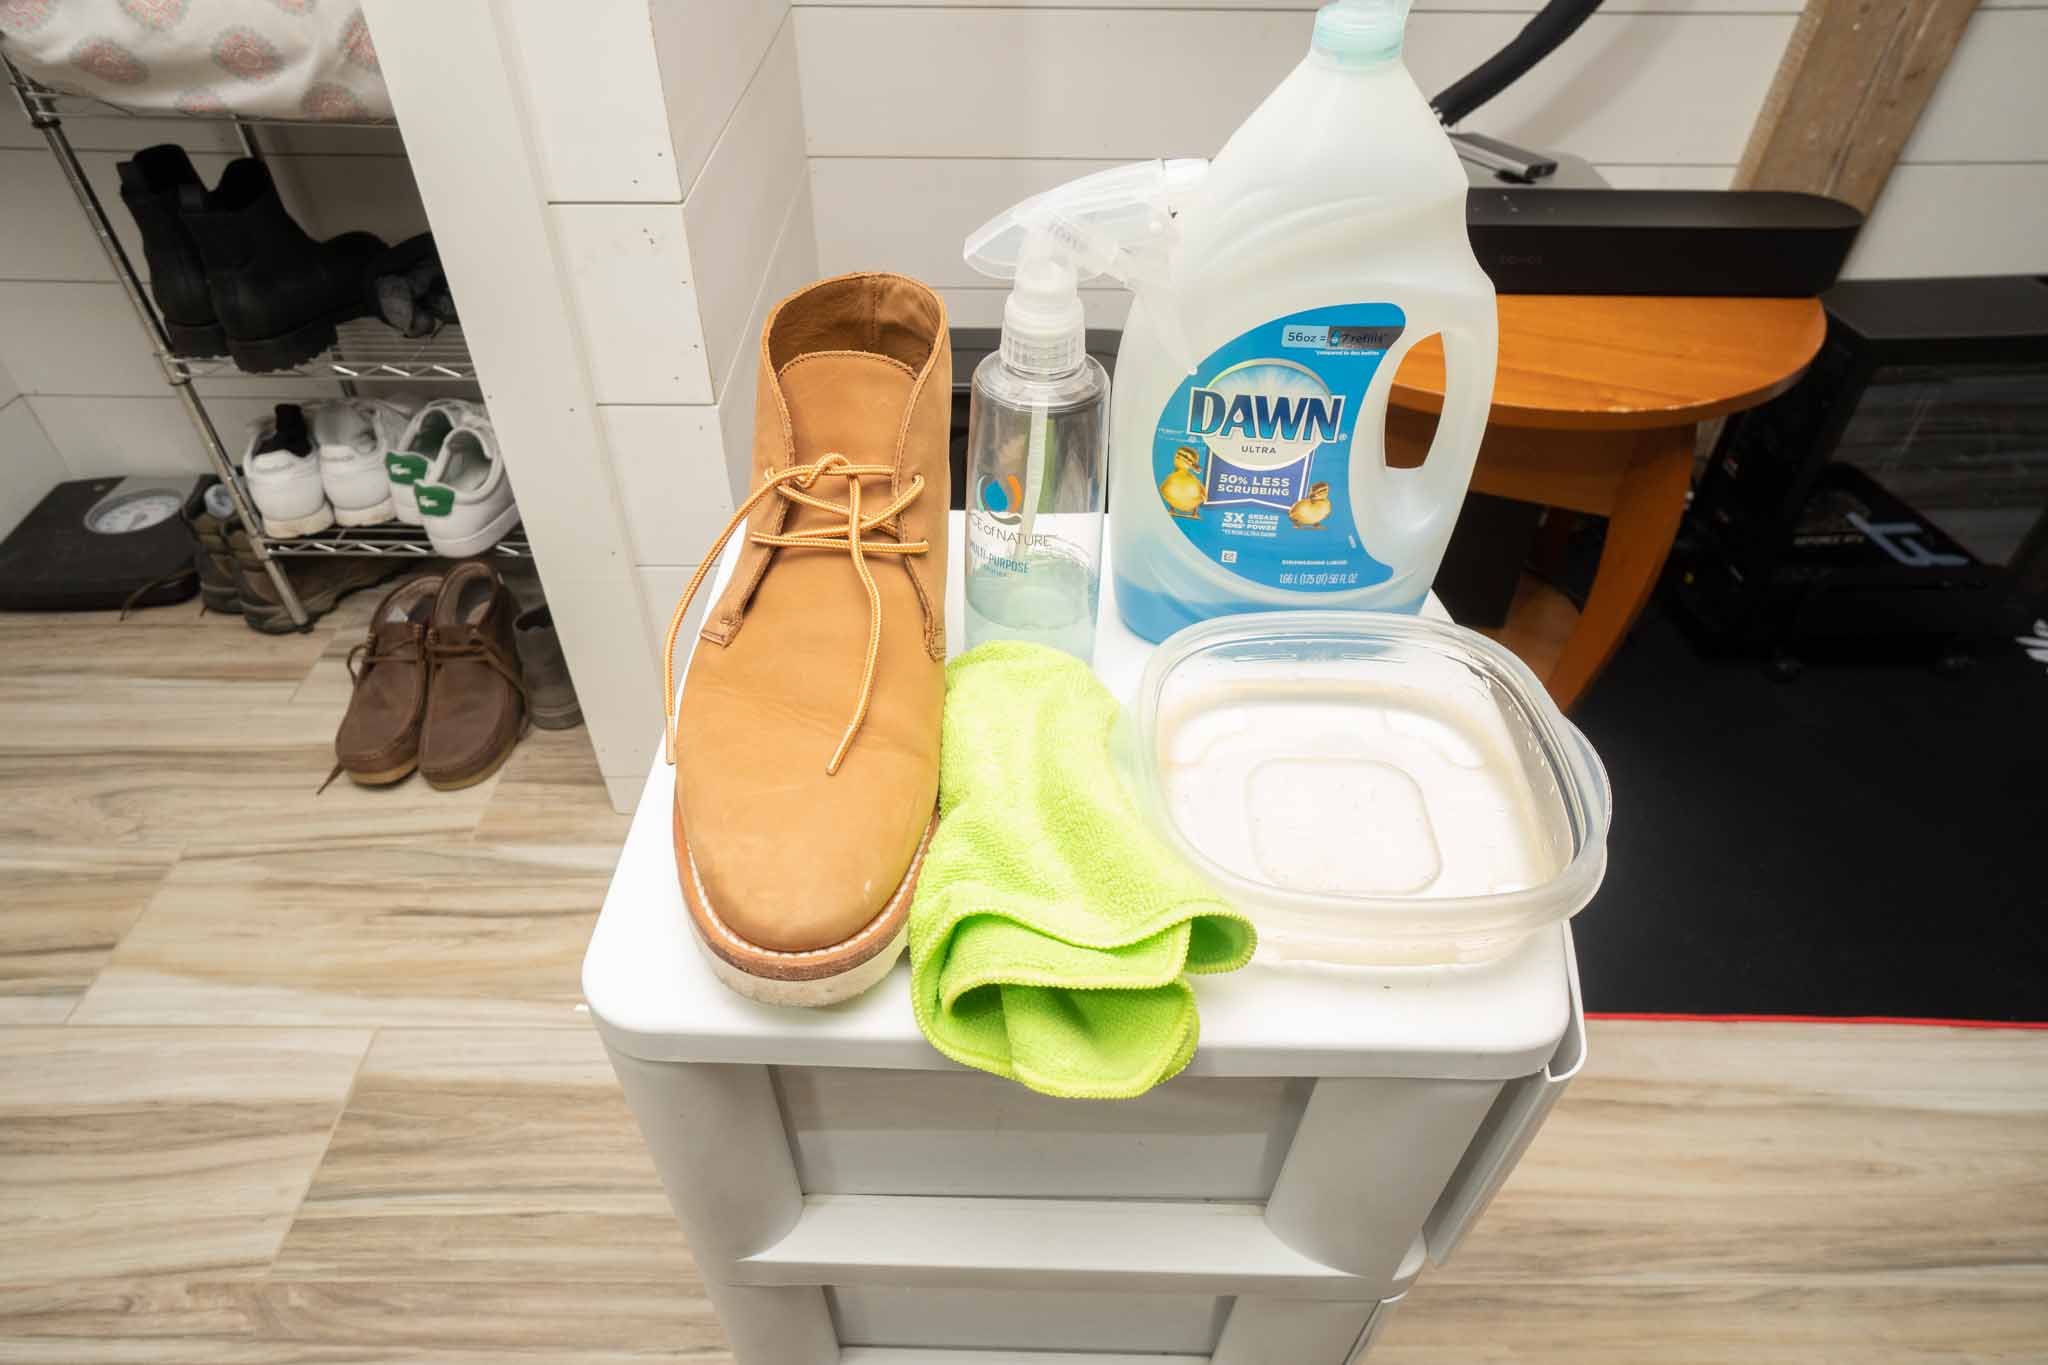 leather boot, microfiber cloth, warm water in bowl, dawn dish soap, spray bottle